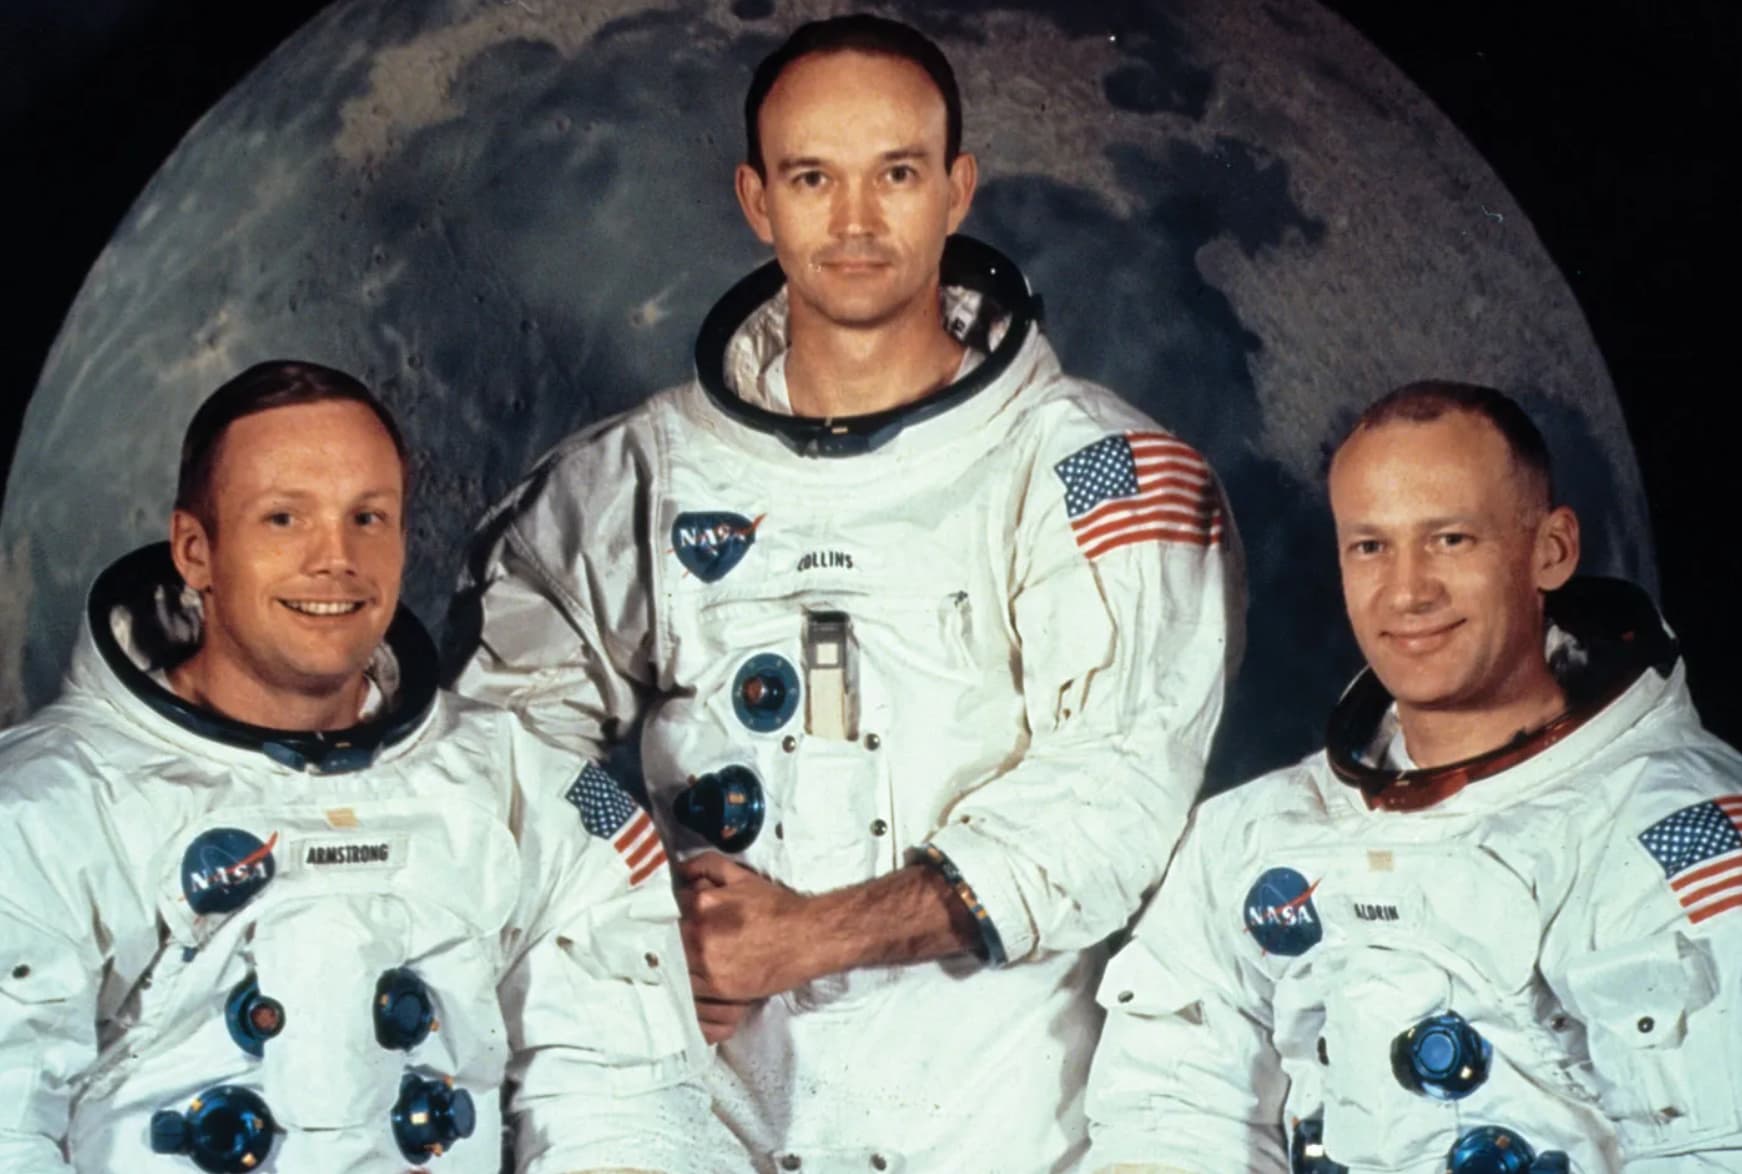 Neil Armstrong, Edwin “Buzz” Aldrin, and Michael Collins Ahead of NASA’s Apollo 11 Mission, which marked the first time humans had ever stepped foot on the moon. 